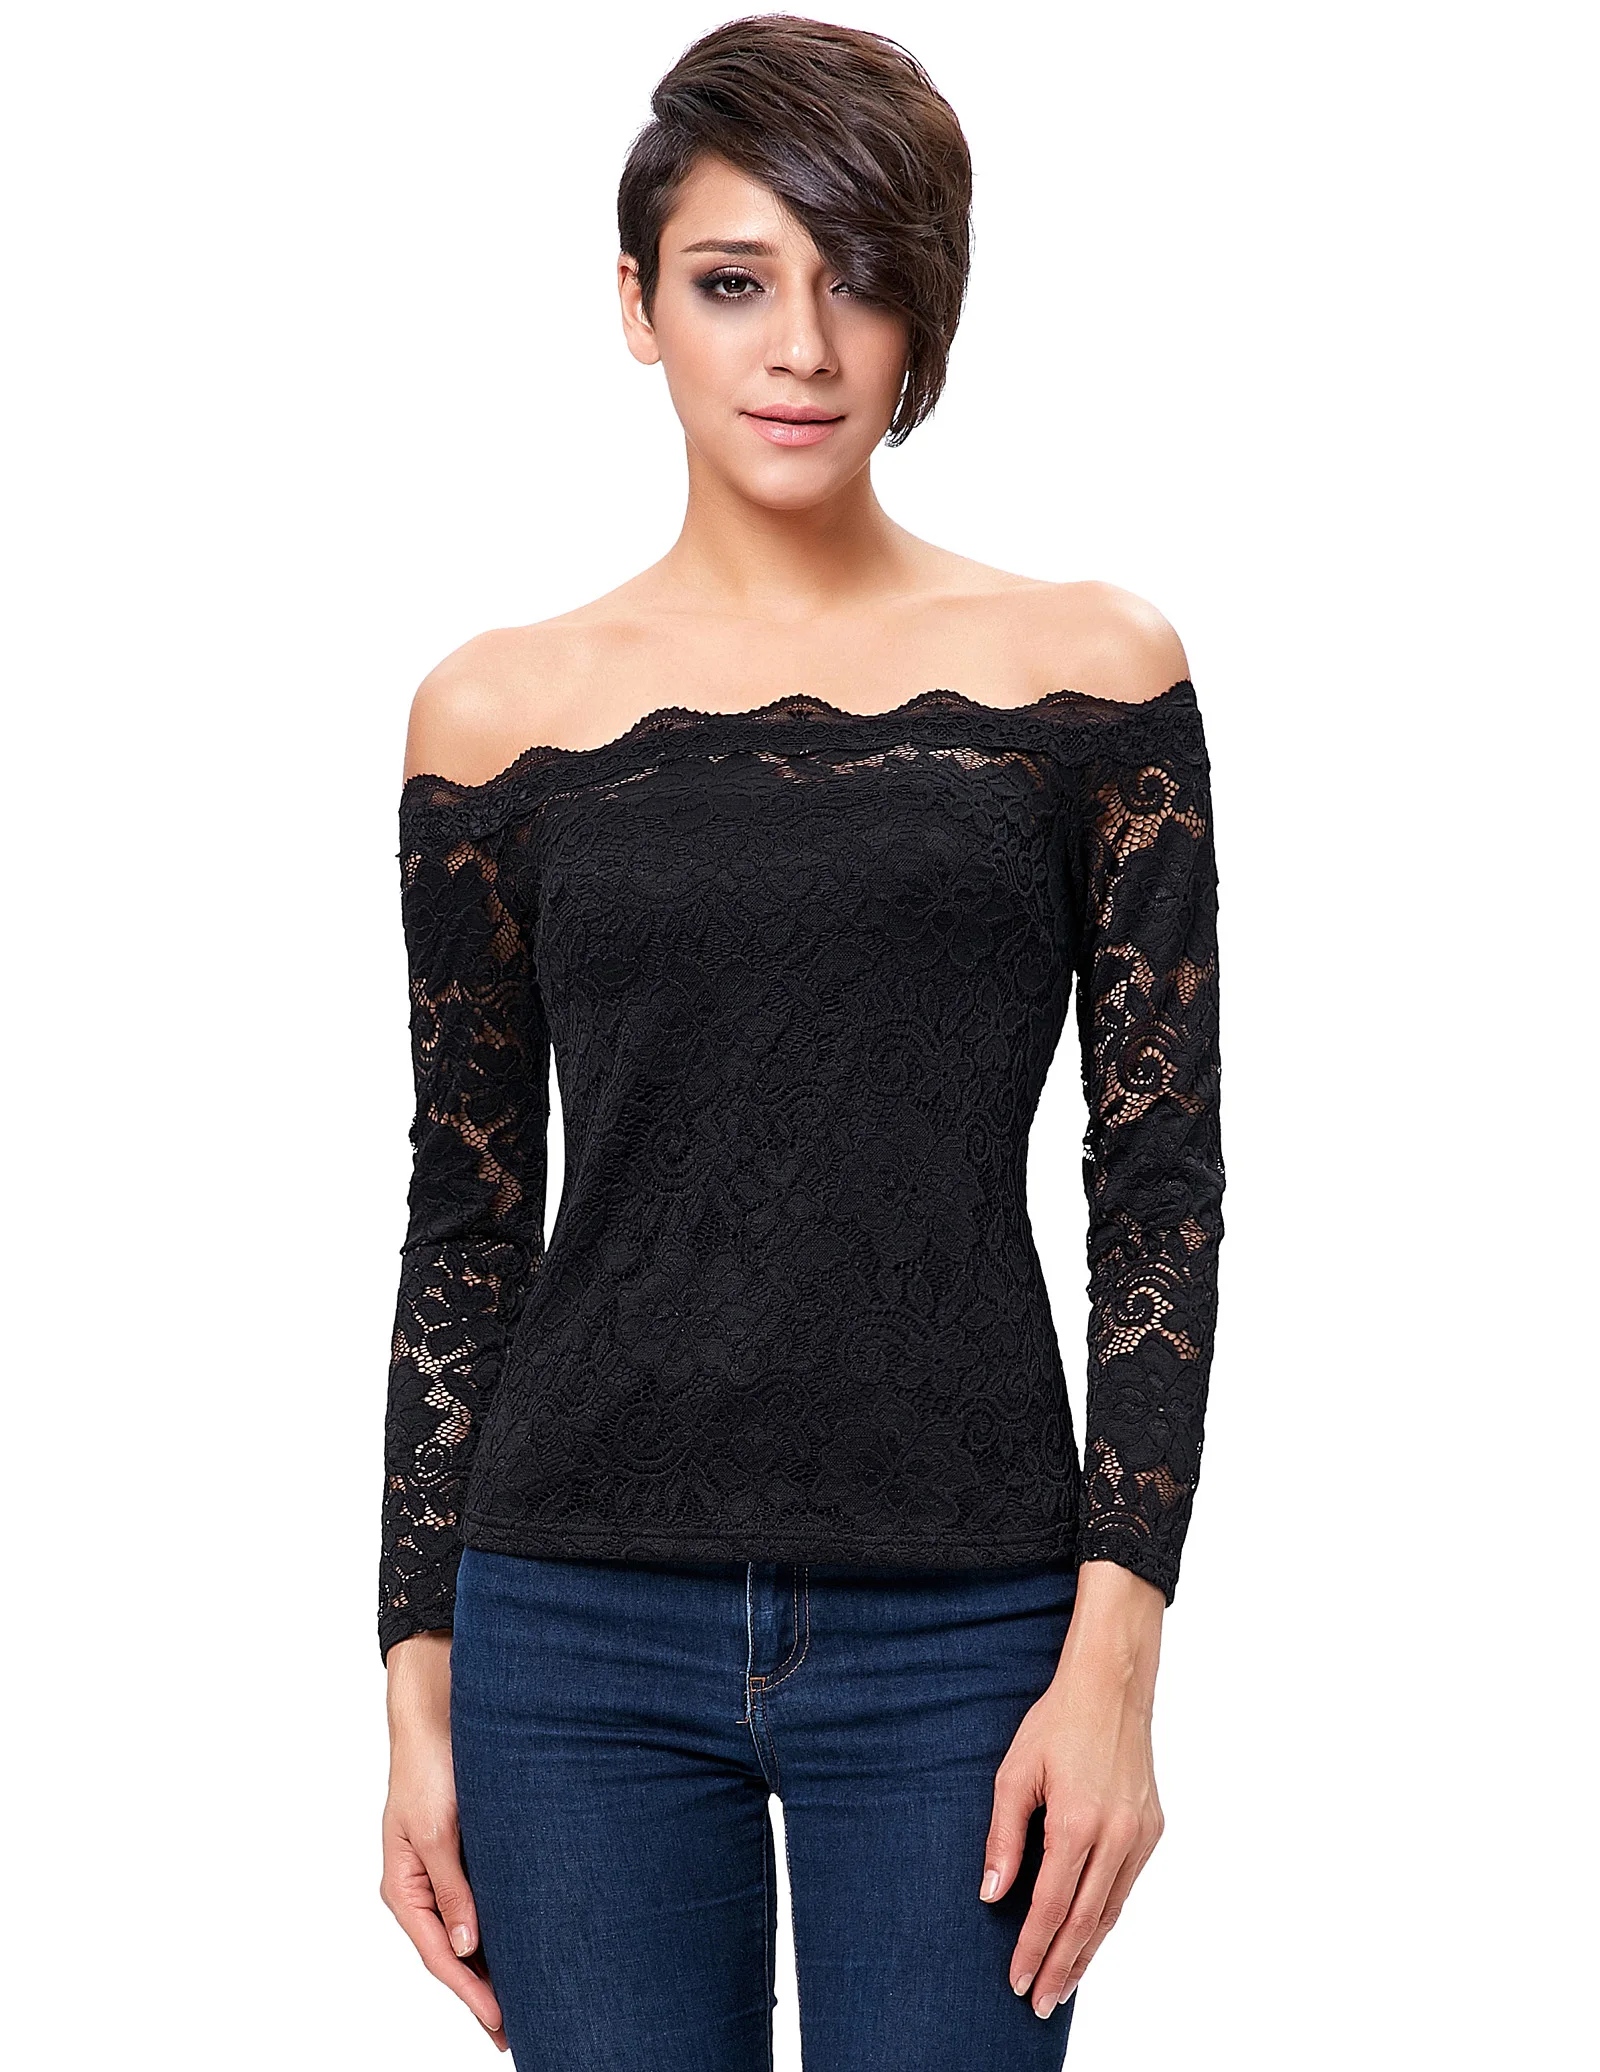 Фото 2018 Sexy Fashion Casual Women's Long Sleeve Floral Lace Off Shoulder Tops | Женская одежда